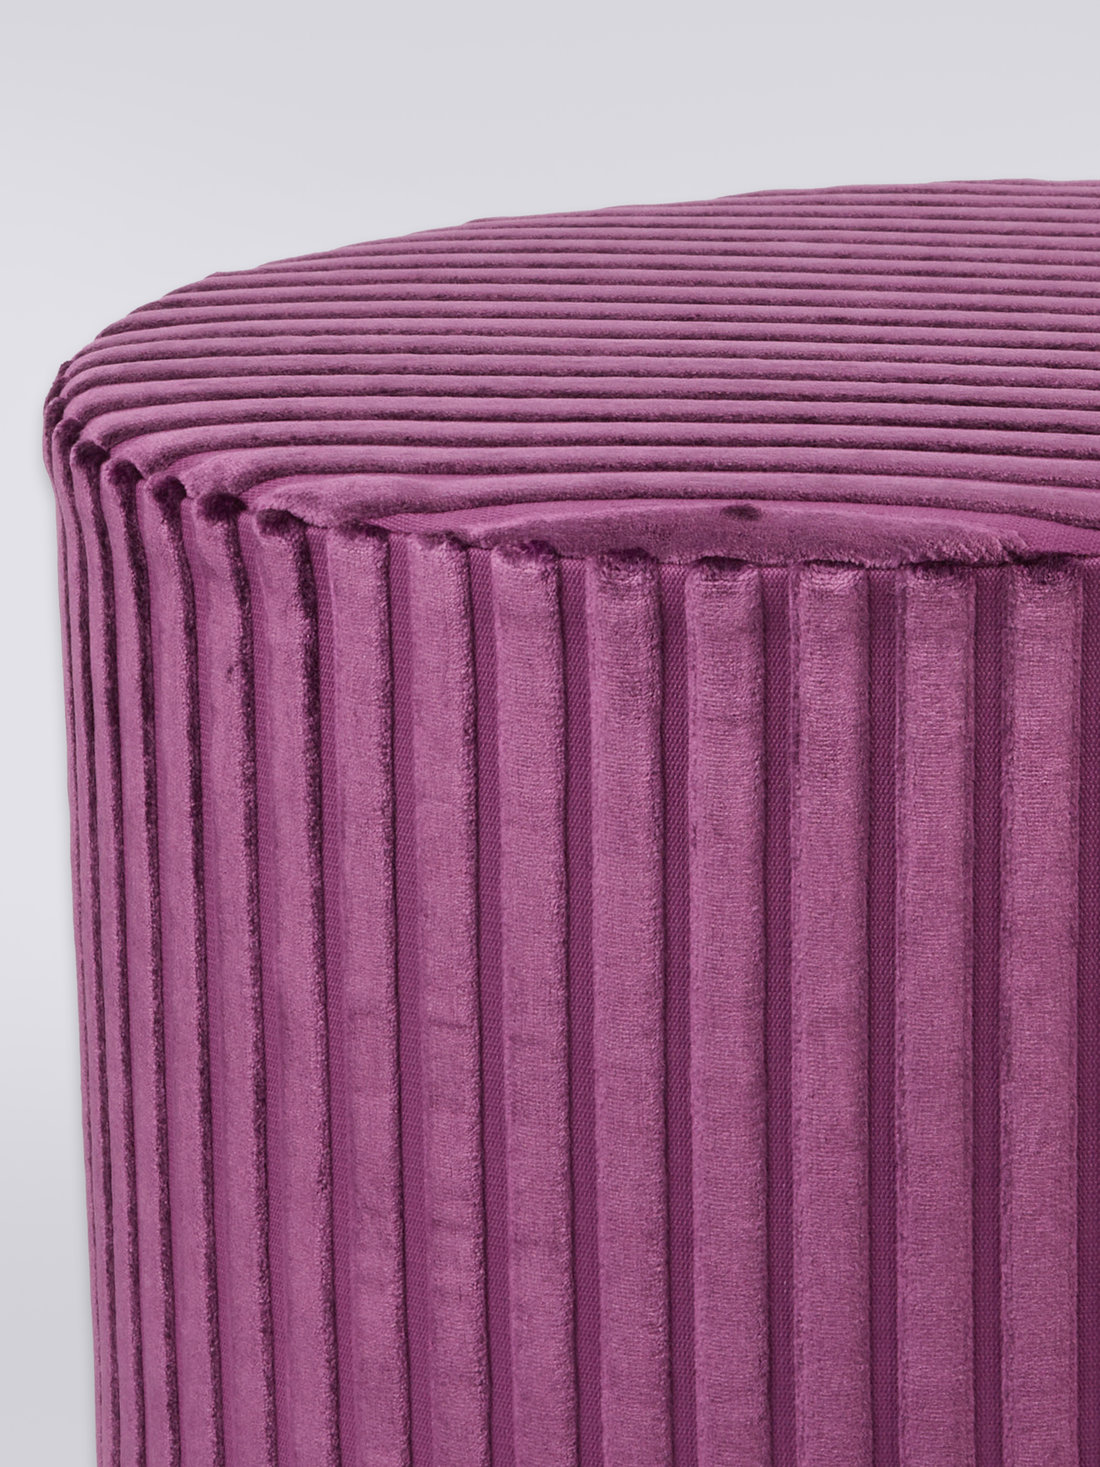 Coomba Cylinder Pouf 40X30, Purple  - 8033050076673 - 2